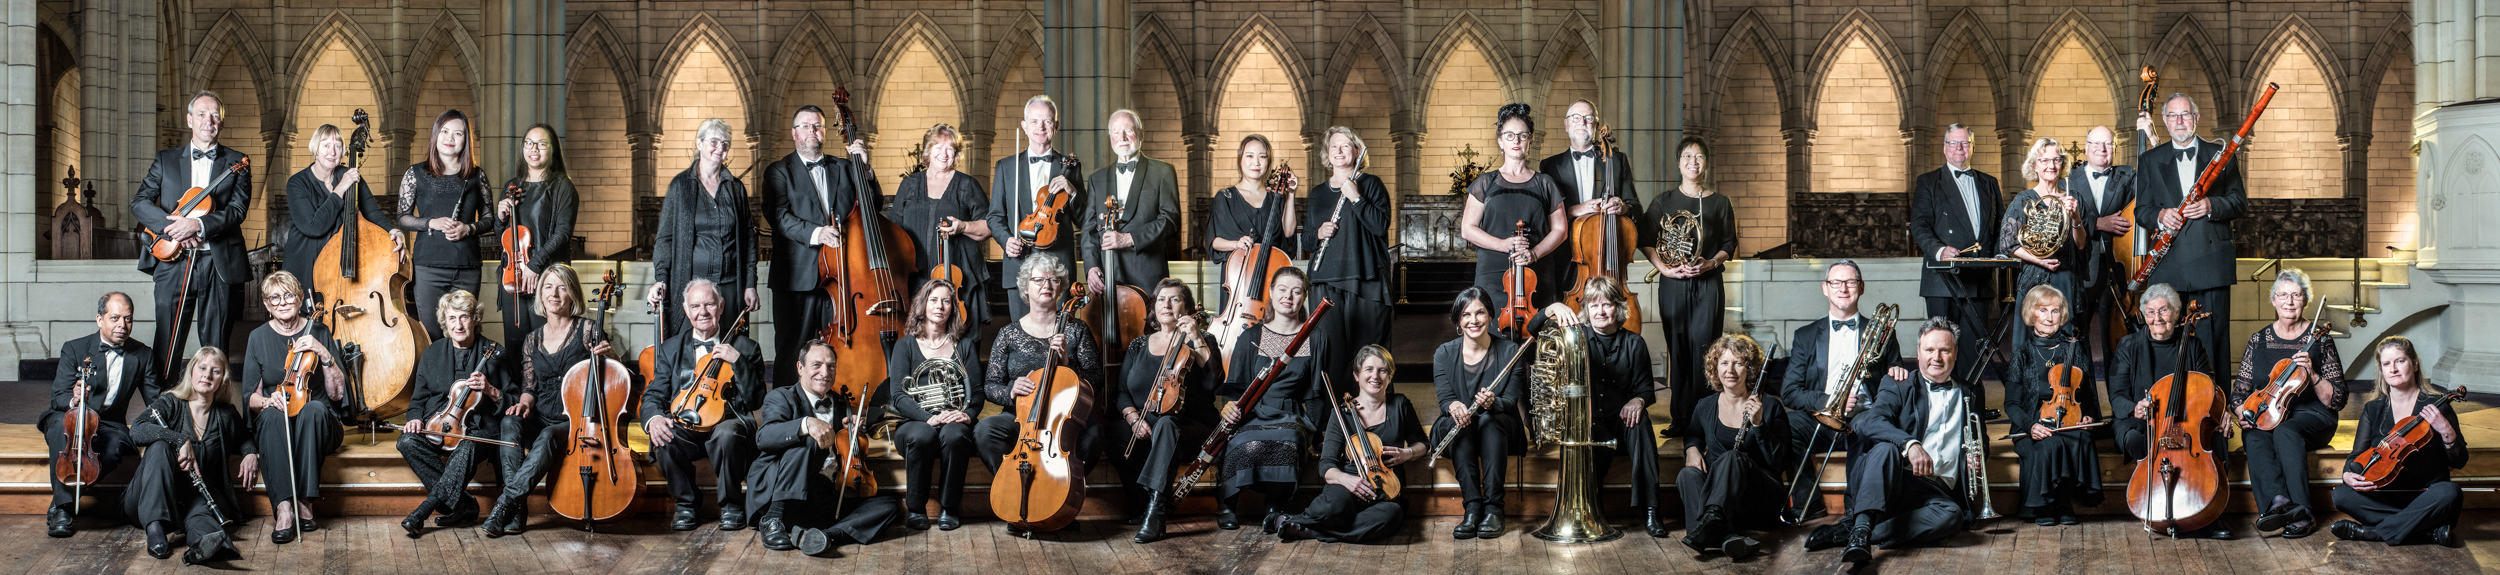 Group portrait of the St. Matthew's Chamber Orchestra